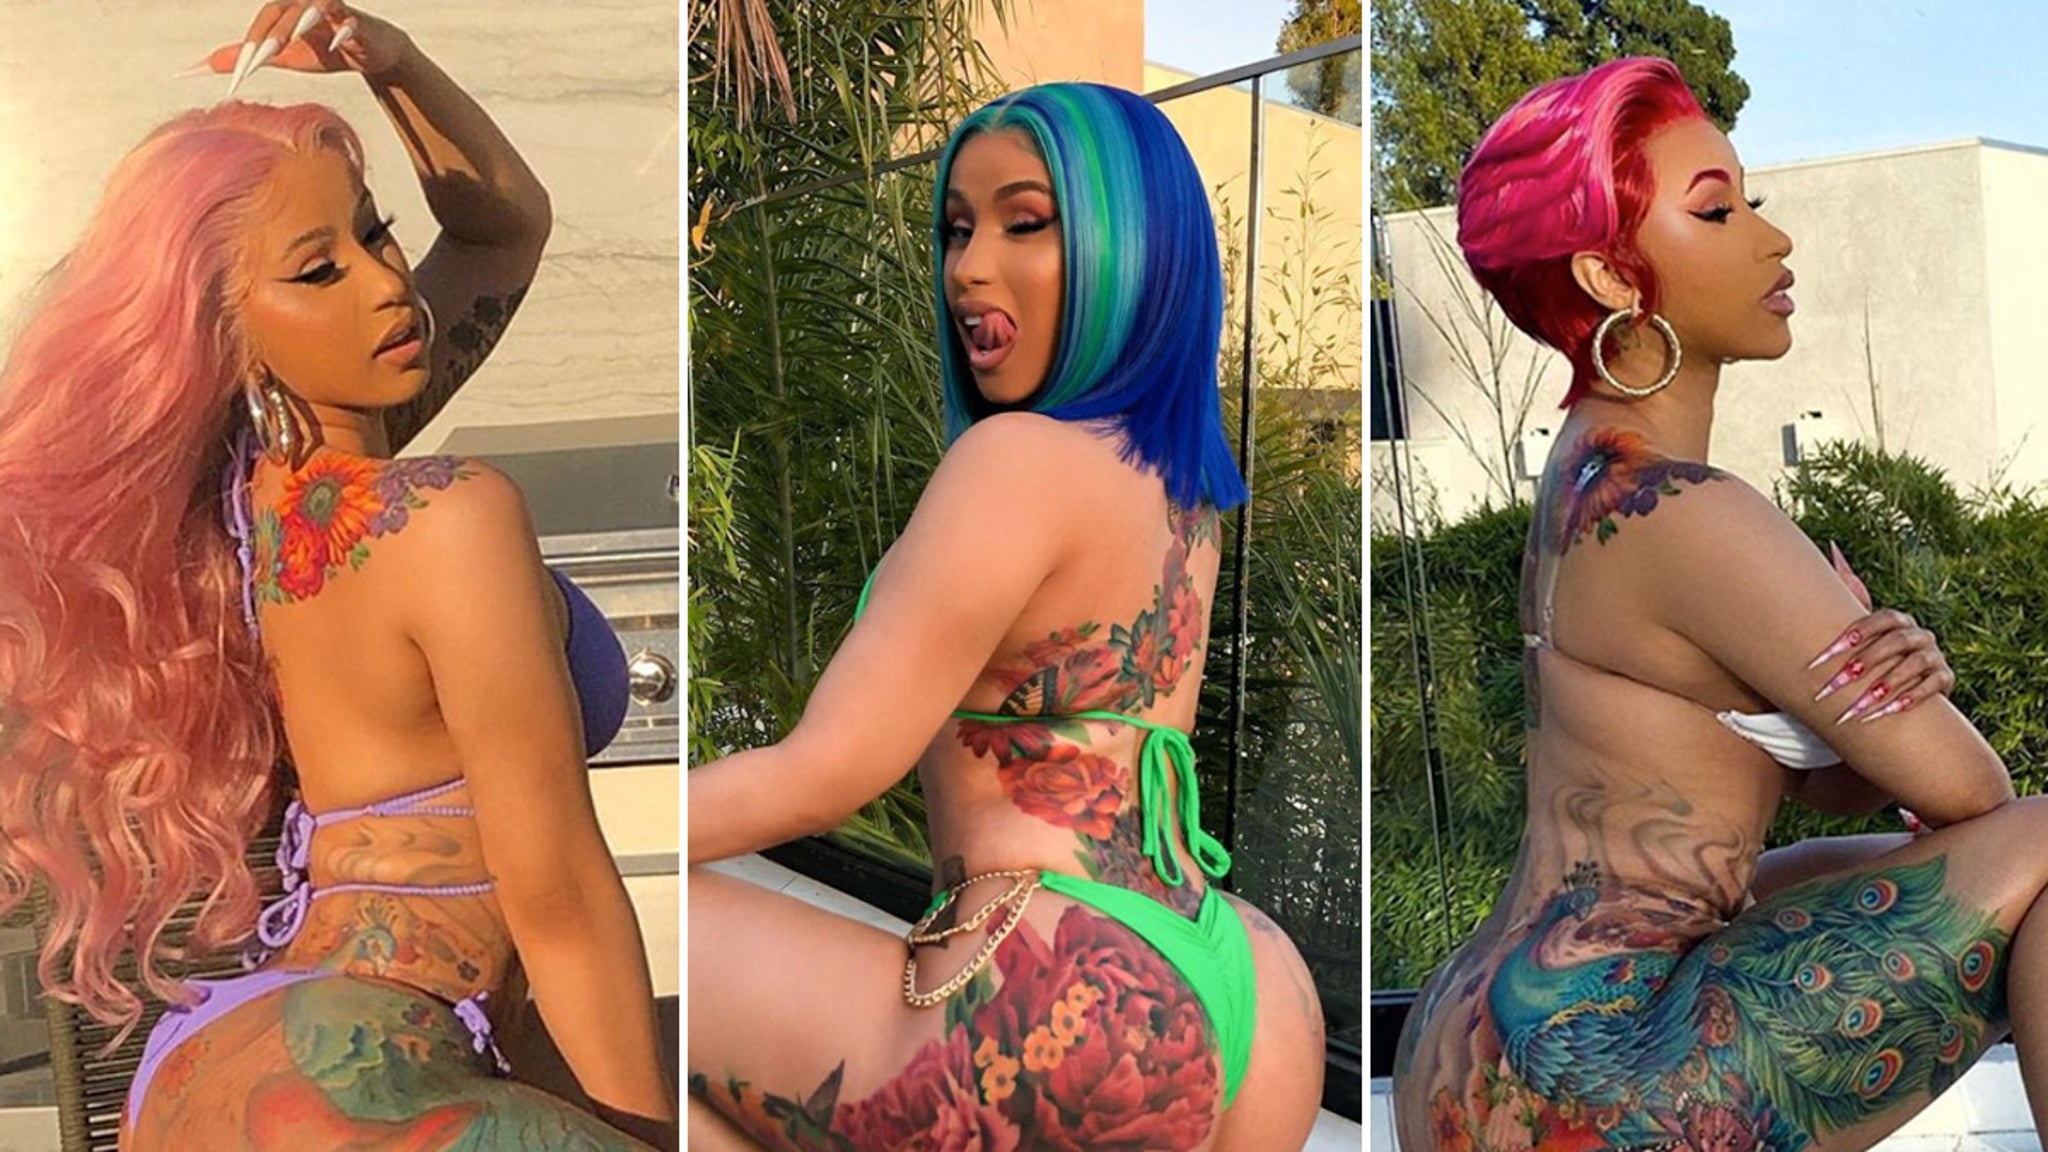 Great ass gallery 28 Booty Ful Shots Of Cardi B To Celebrate The Bday Babe